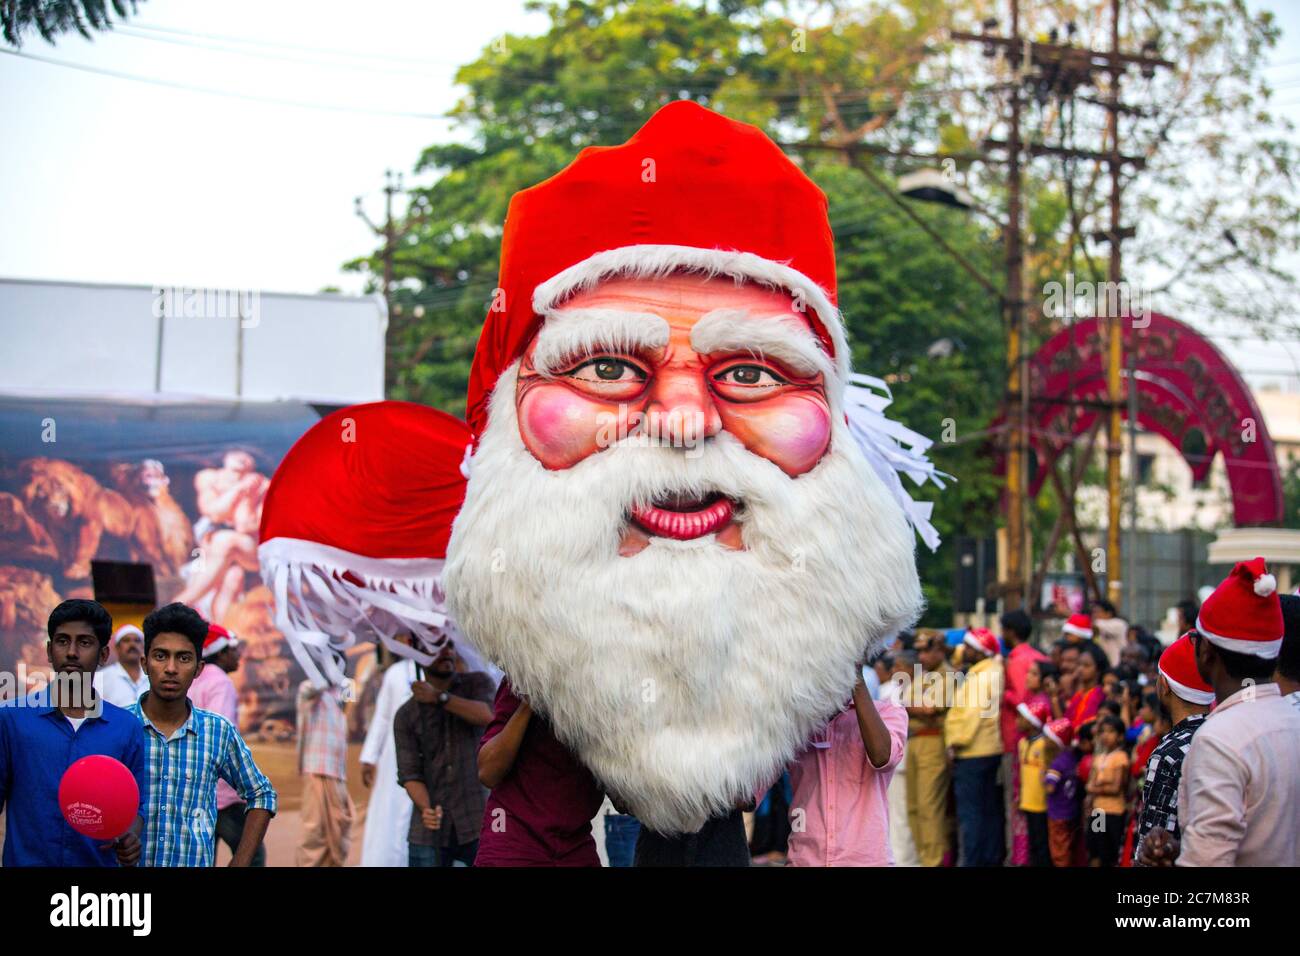 Buon Natale Kerala.Colourfully Dressed Upon Santa S Doing Flashmob From Buon Natale Christmas Fest Thrissur 2017 Thrissur Kerala India A Unique Christmas Celebration Whe Stock Photo Alamy